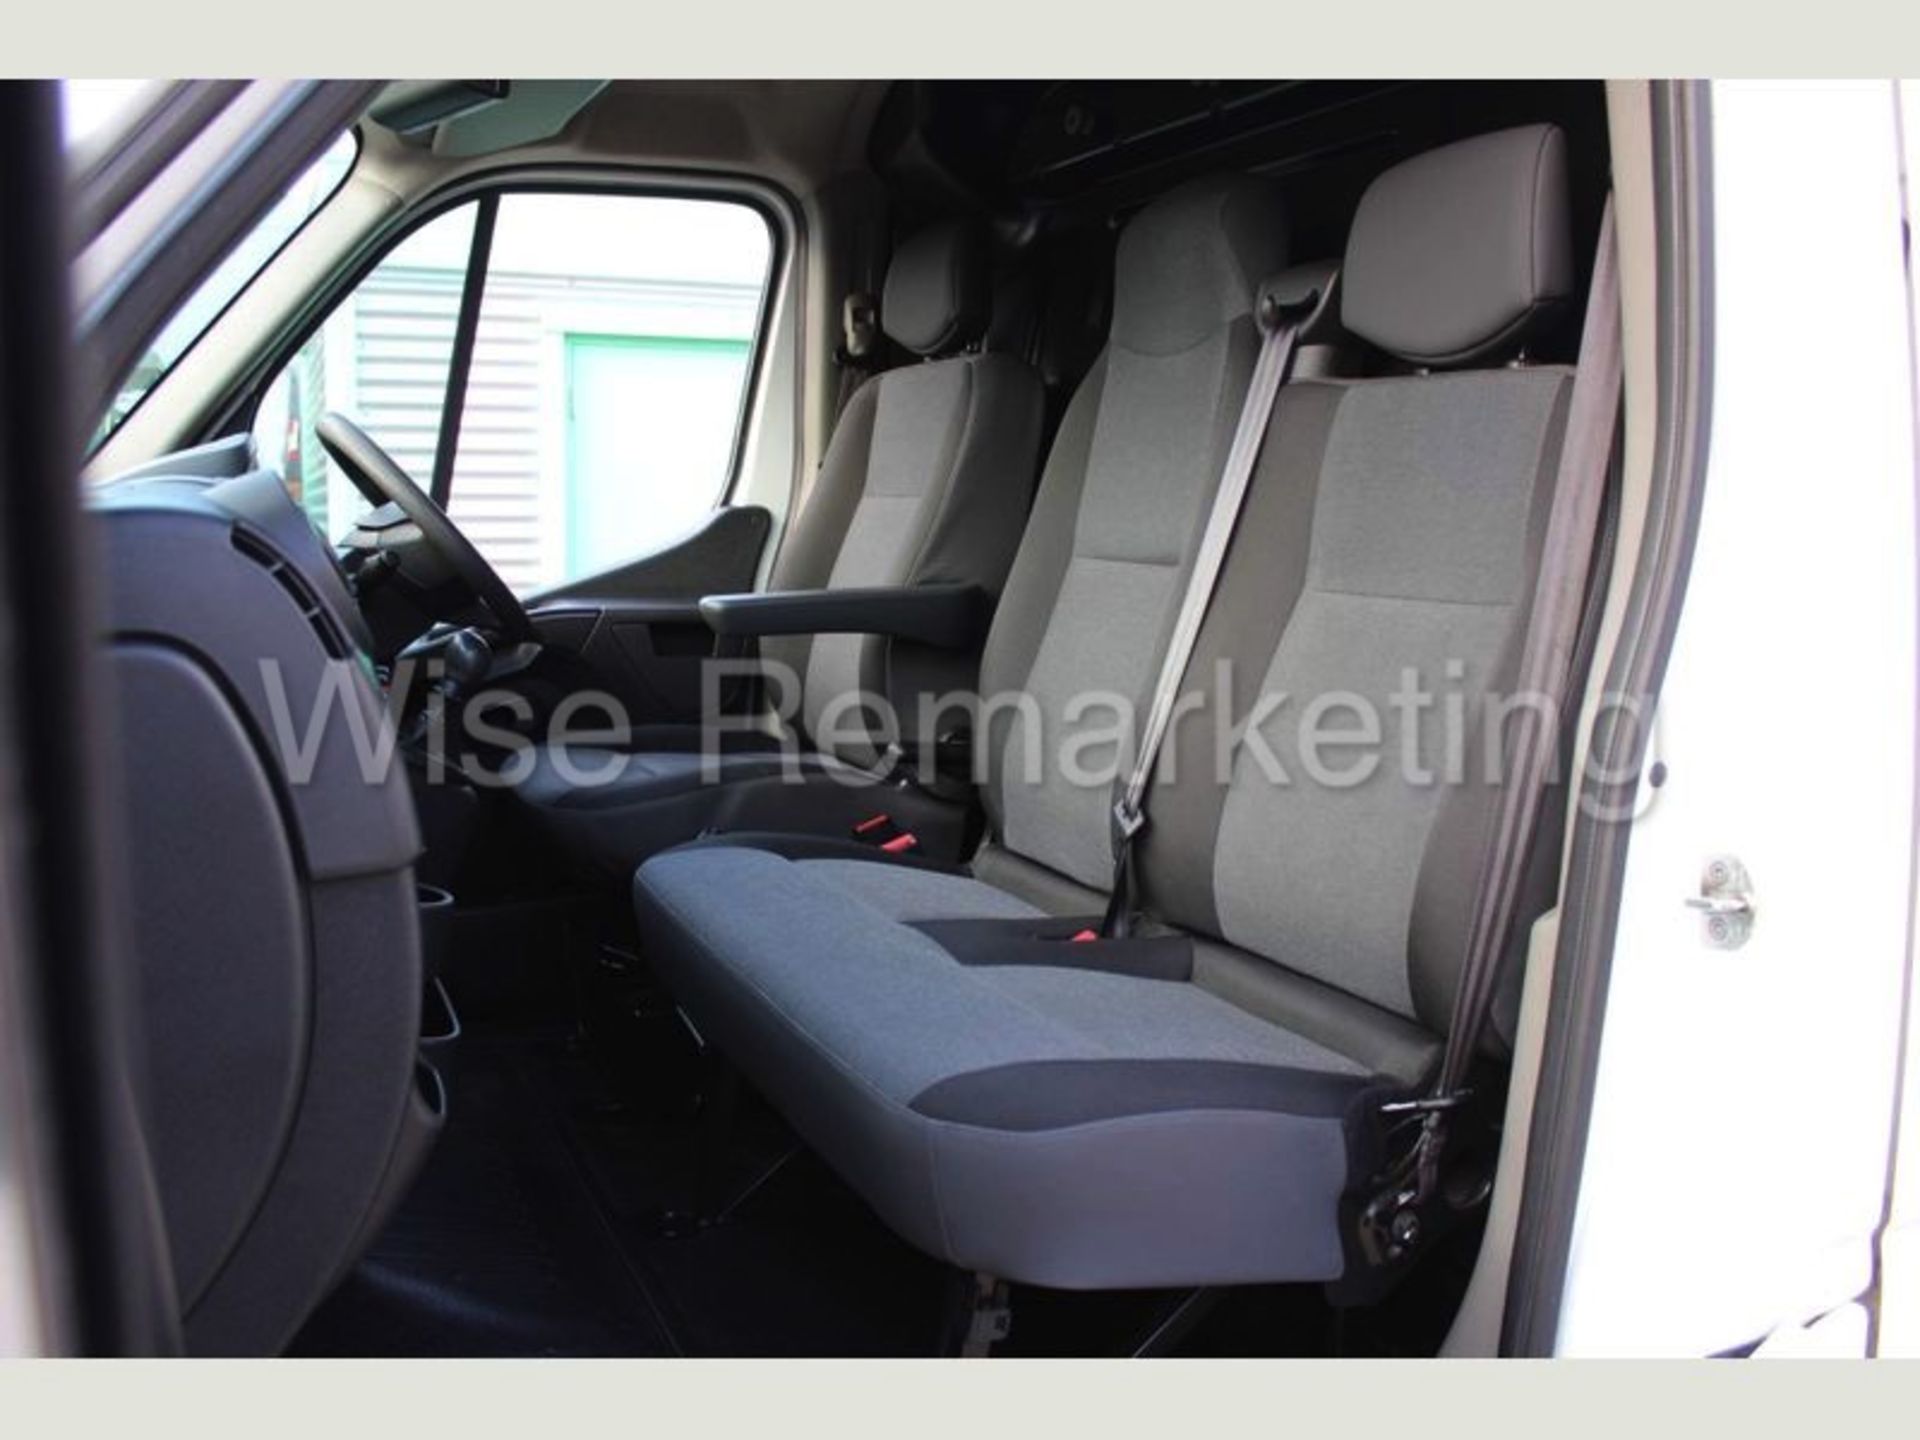 Renault Master L3H3 *LWB - Super Roof* (2018 ~ Euro 6 Compliant) Air Con - Electric Pack (1 Owner) - Image 8 of 11